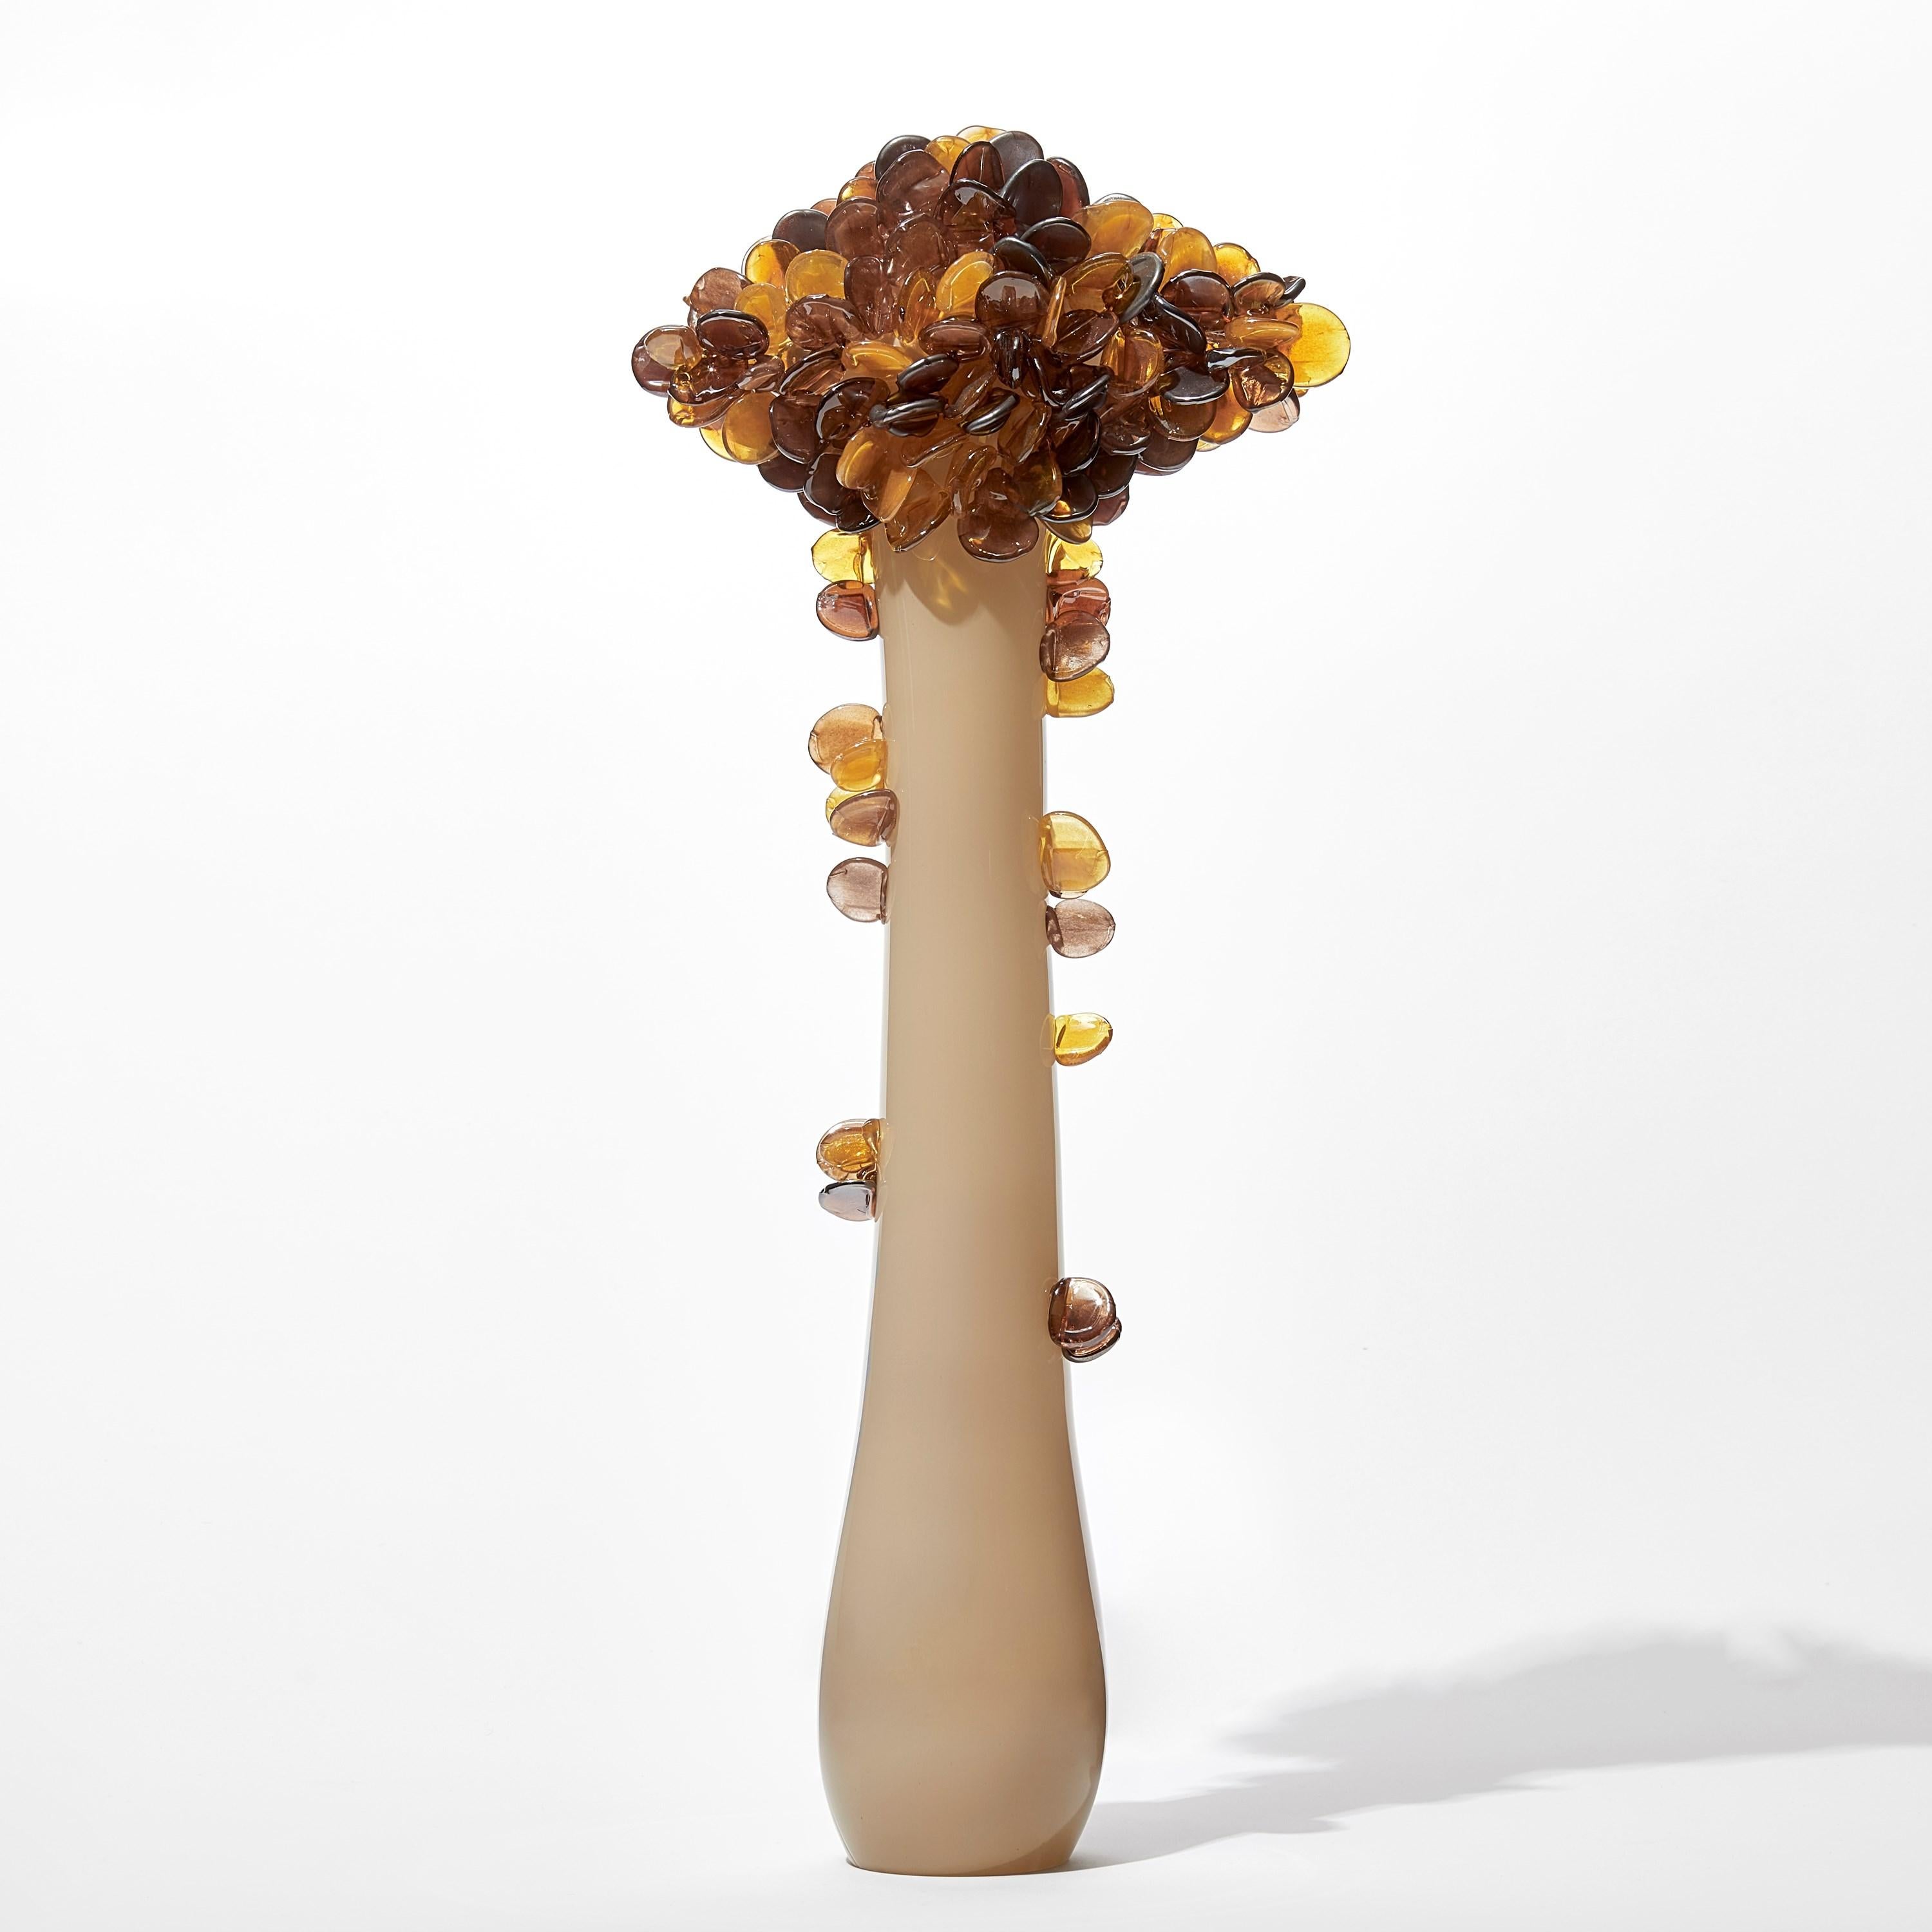 'Enchanted Dusk in Amber II' is a unique handblown and sculpted glass artwork by the British artist, Louis Thompson.

With both his Enchanted Dawn and Dusk collections, Thompson brings a joyous and playful element to his glass. Gracious sweeping